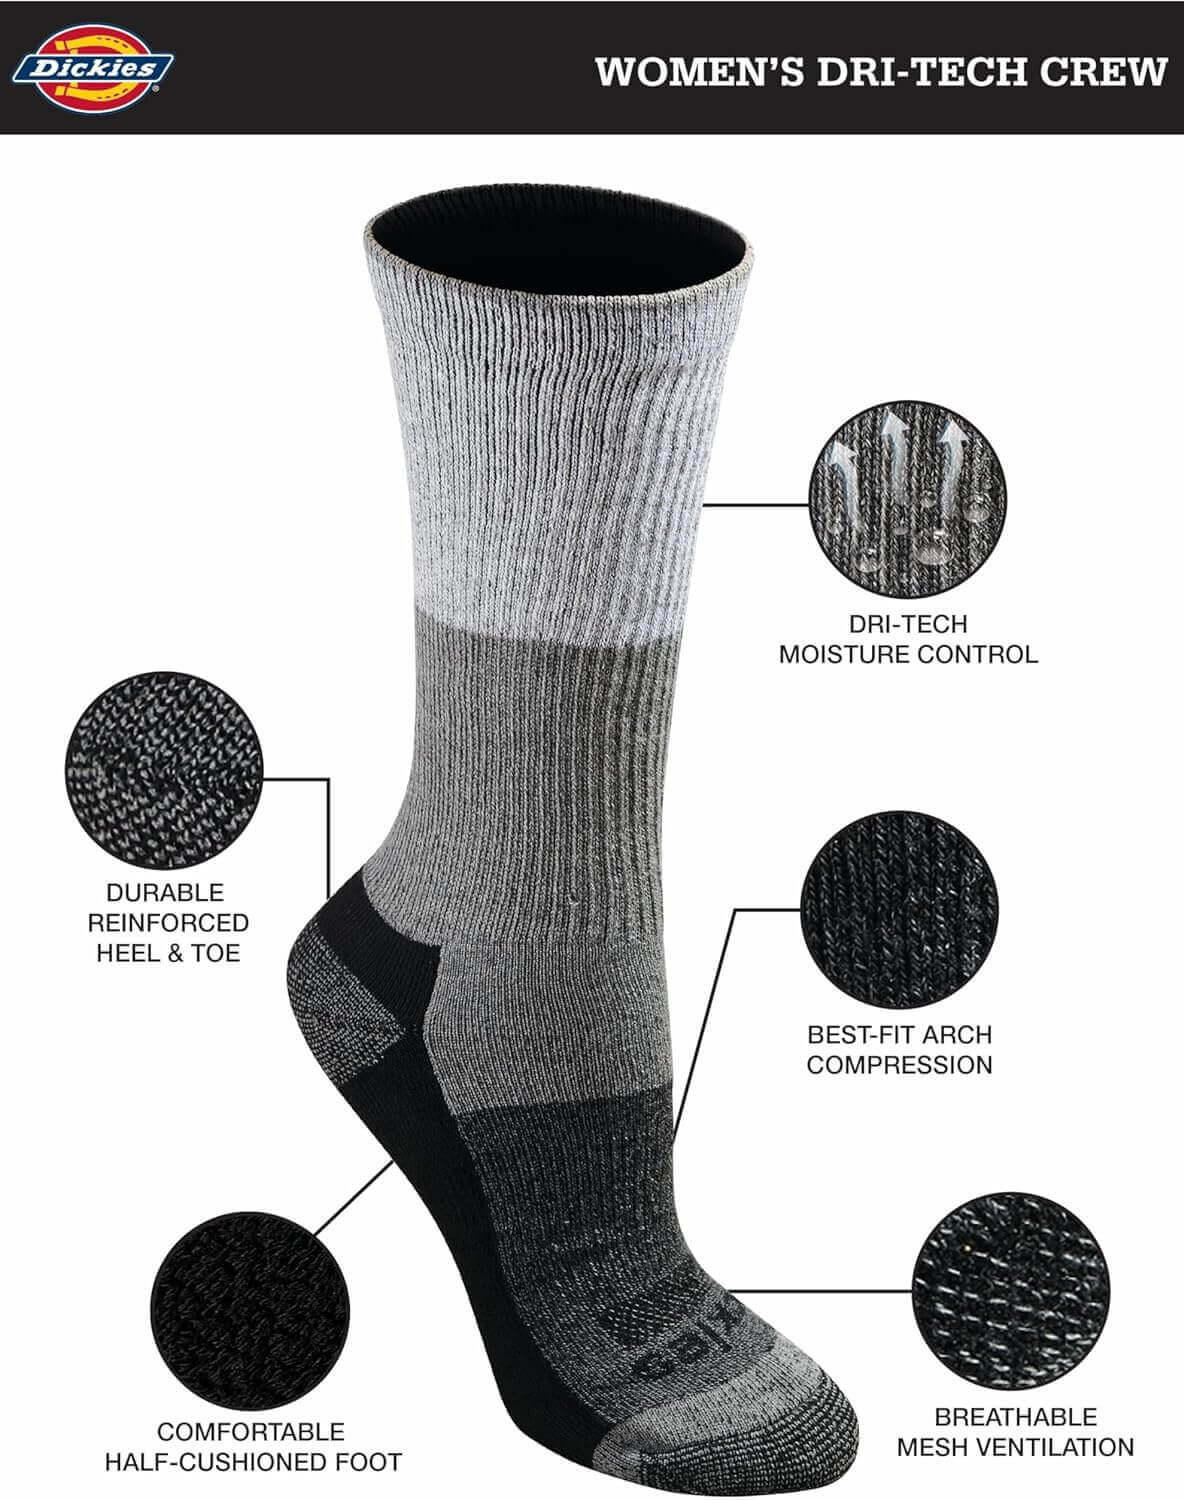 Shop The Latest >Women's Dri-tech Moisture Control Crew Socks Multipack > *Only $21.59*> From The Top Brand > *Dickiesl* > Shop Now and Get Free Shipping On Orders Over $45.00 >*Shop Earth Foot*